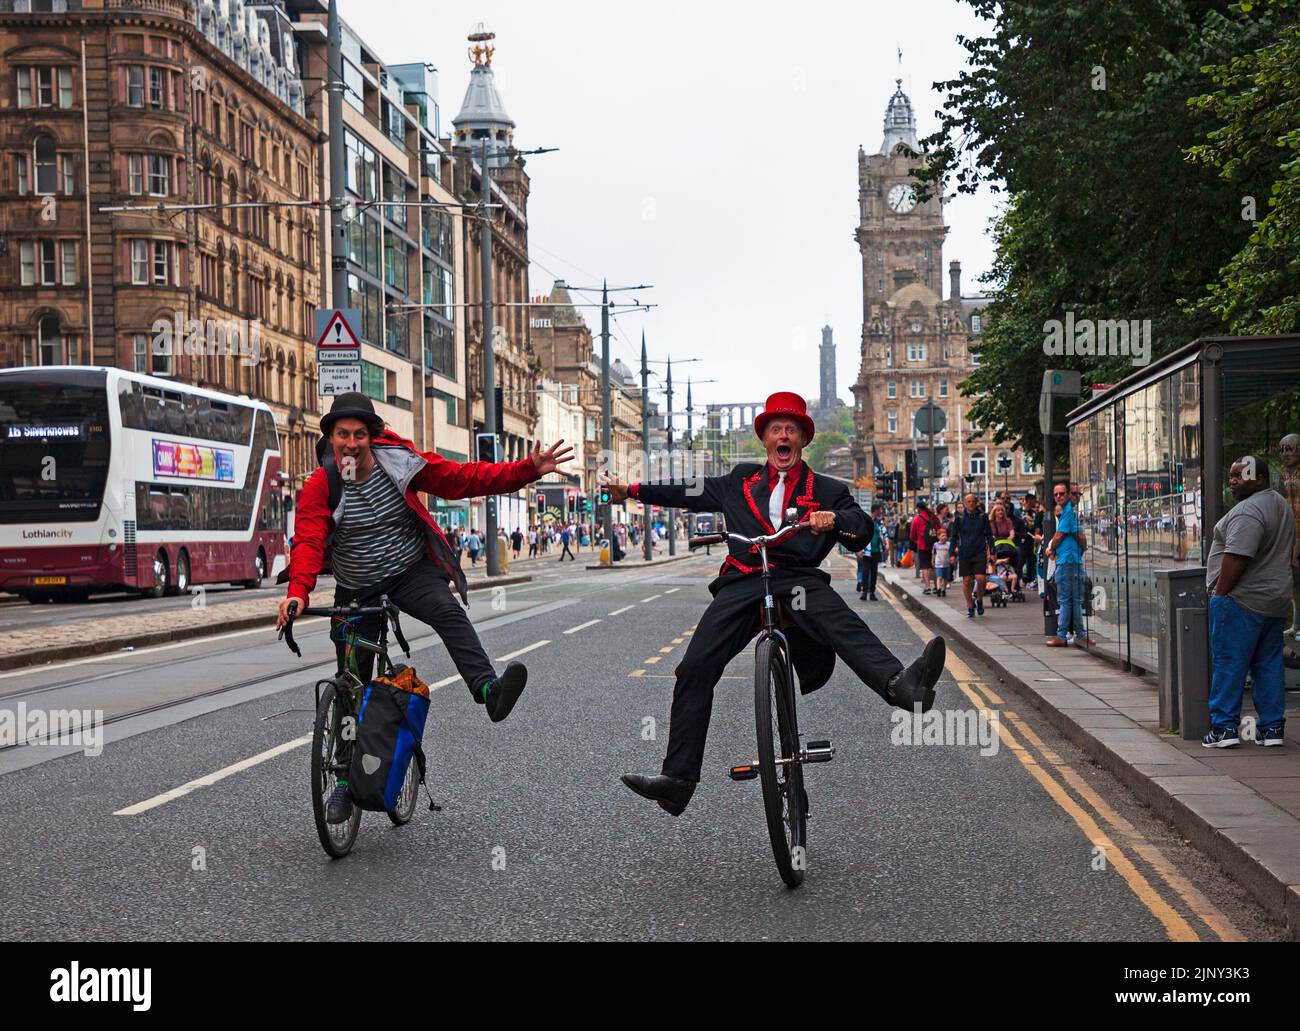 Princes Street, Edinburgh, Scotland, UK. EdFringe street performers, Todd Various on his adapted Penny Farthing bicycle and Mat Keys on his road bike have an unplanned fun race along Princes Street much to the amusement of passersby. Credit: Arch White/alamy live news. Stock Photo